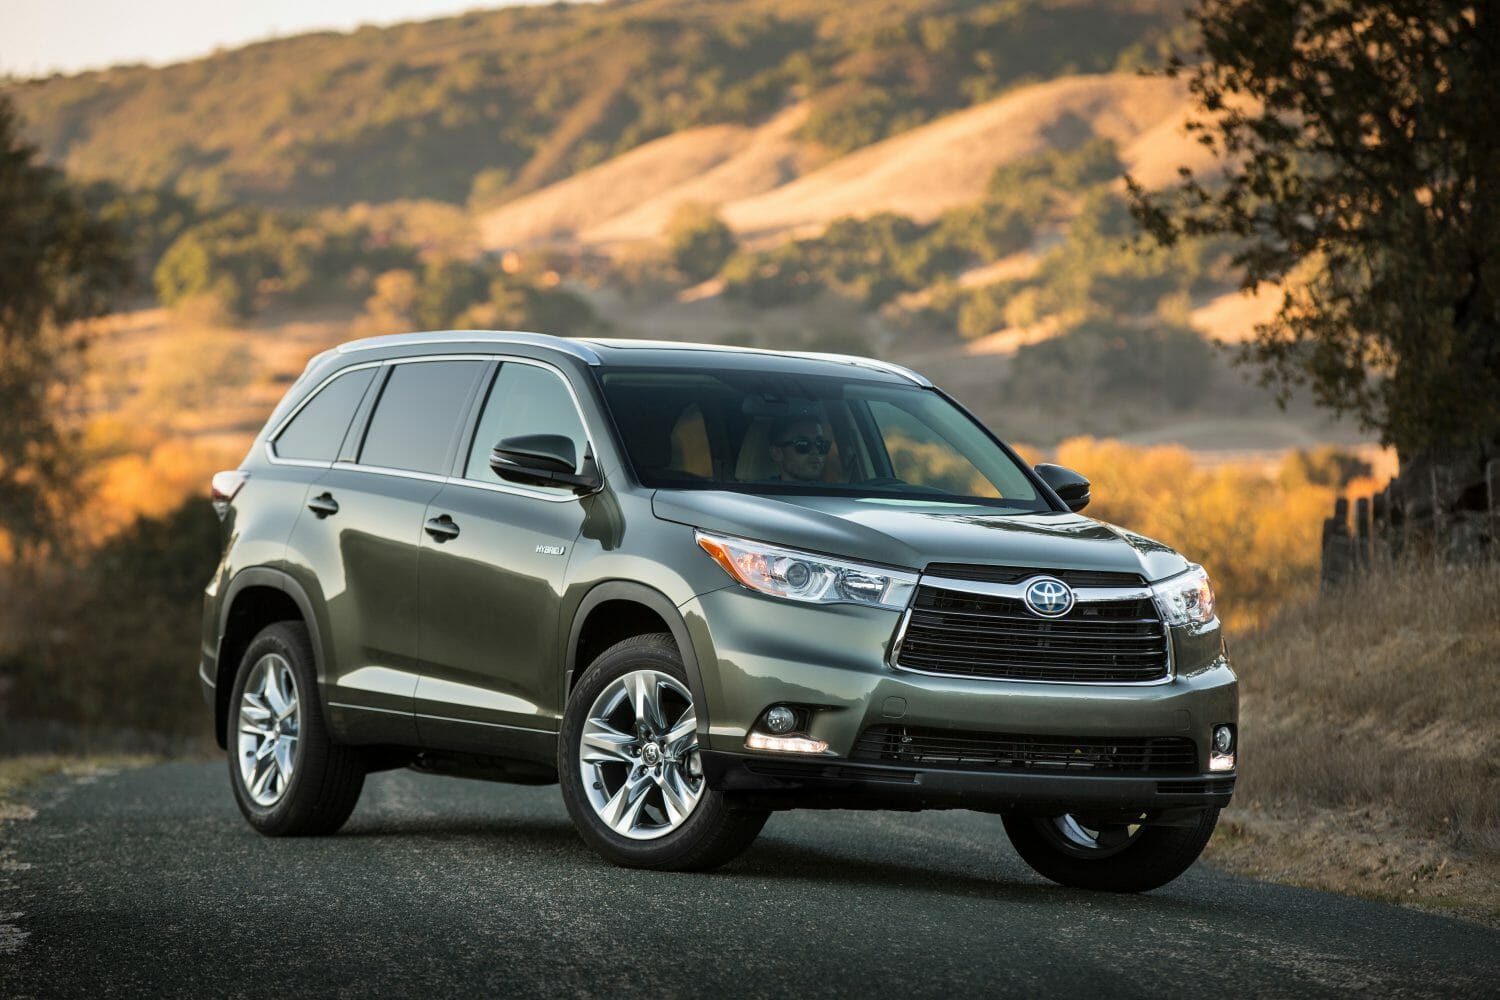 2015 Toyota Highlander Review: A Midsize SUV that Excels in Reliability and Safety